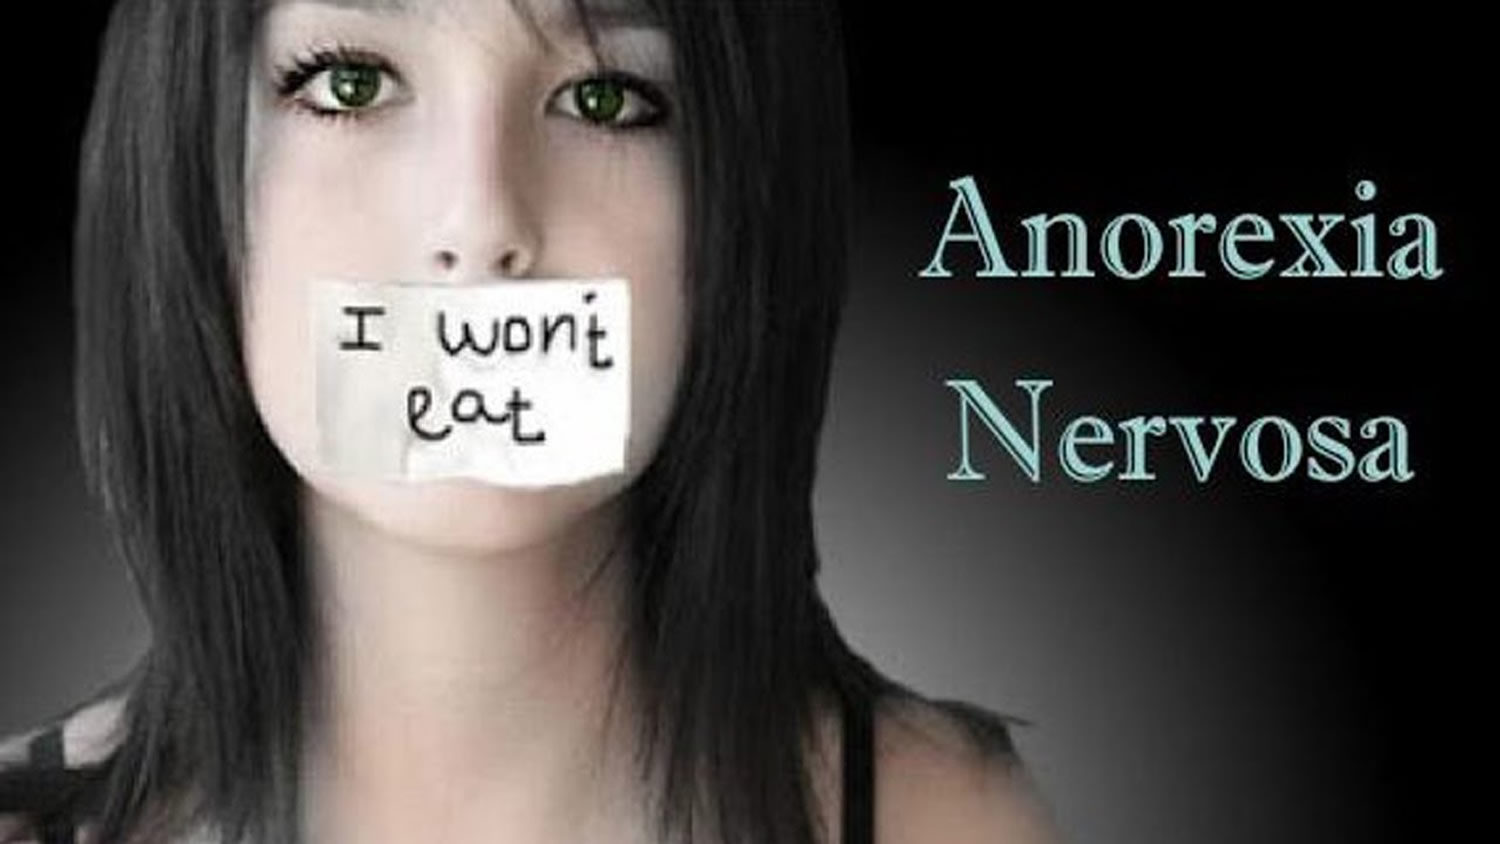 of anorexia nervosa research